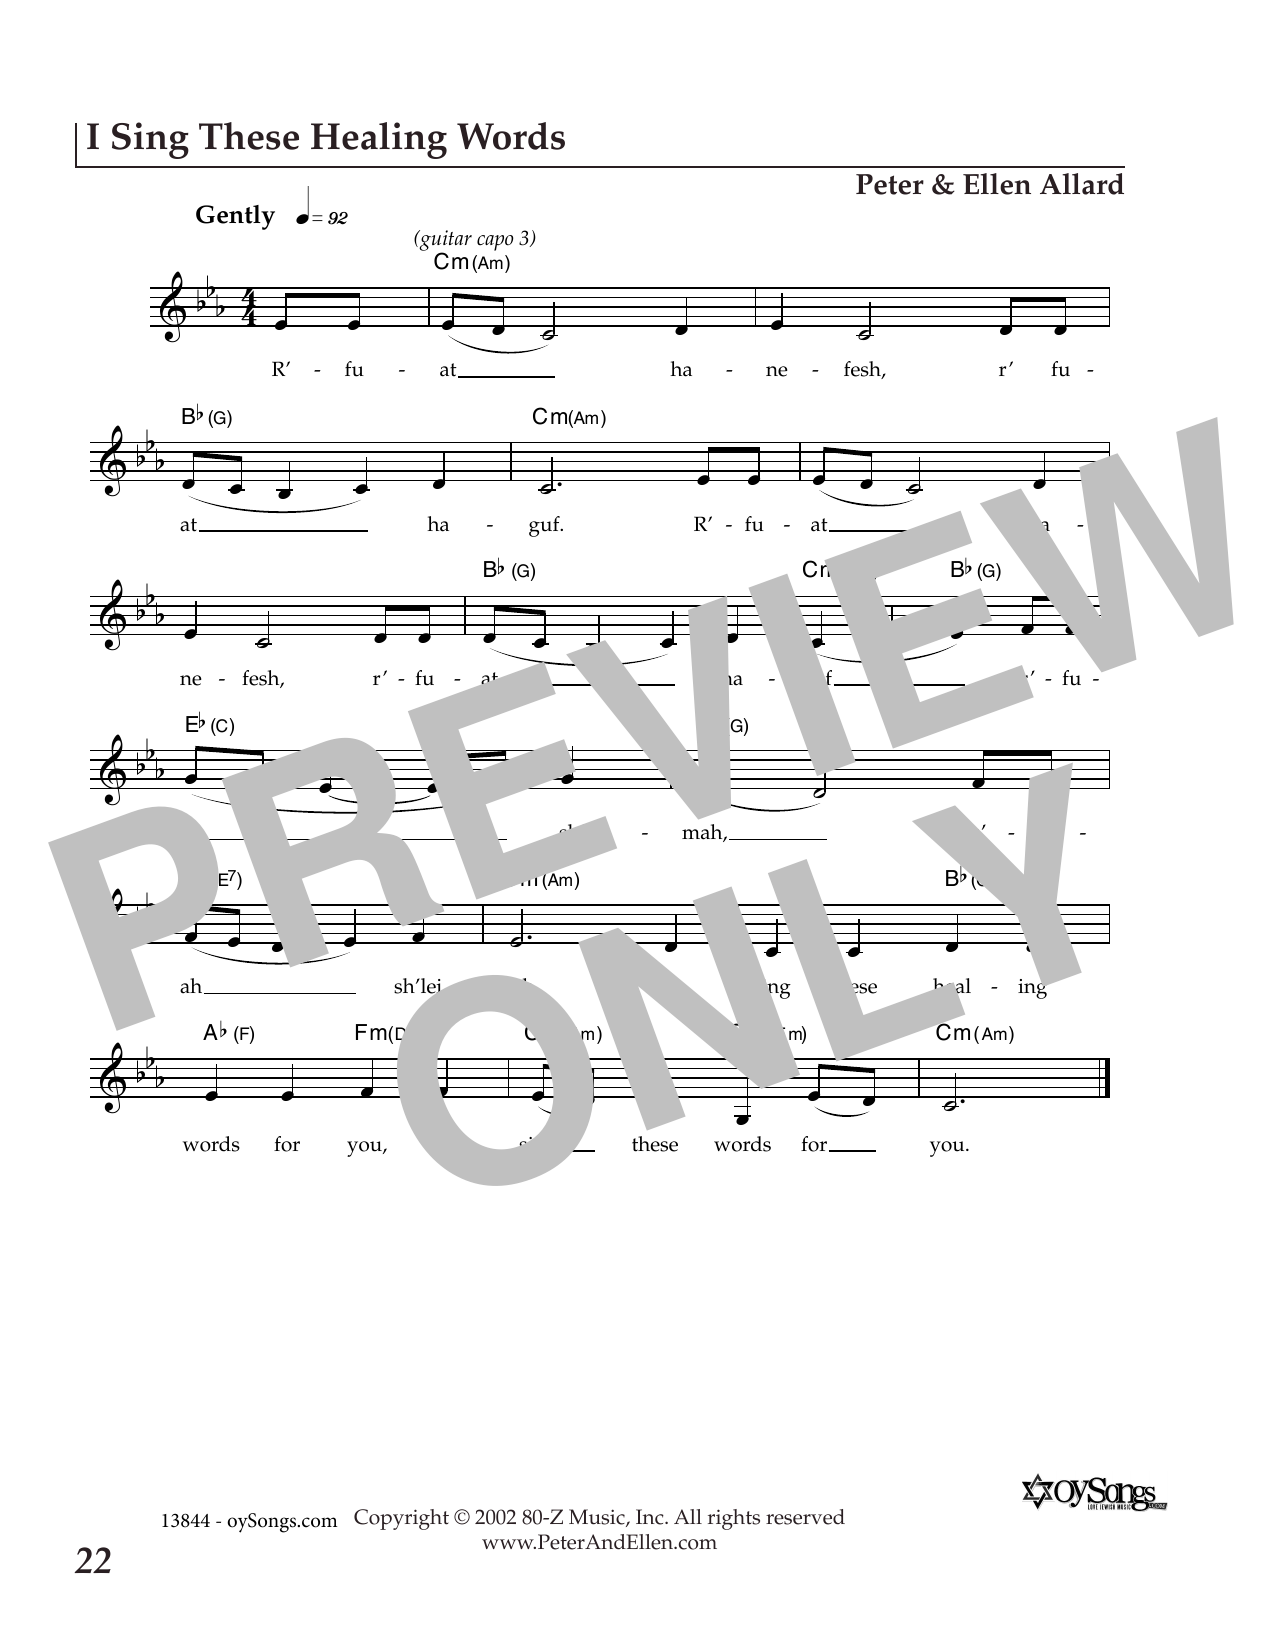 Ellen Allard I Sing These Healing Words sheet music notes and chords. Download Printable PDF.